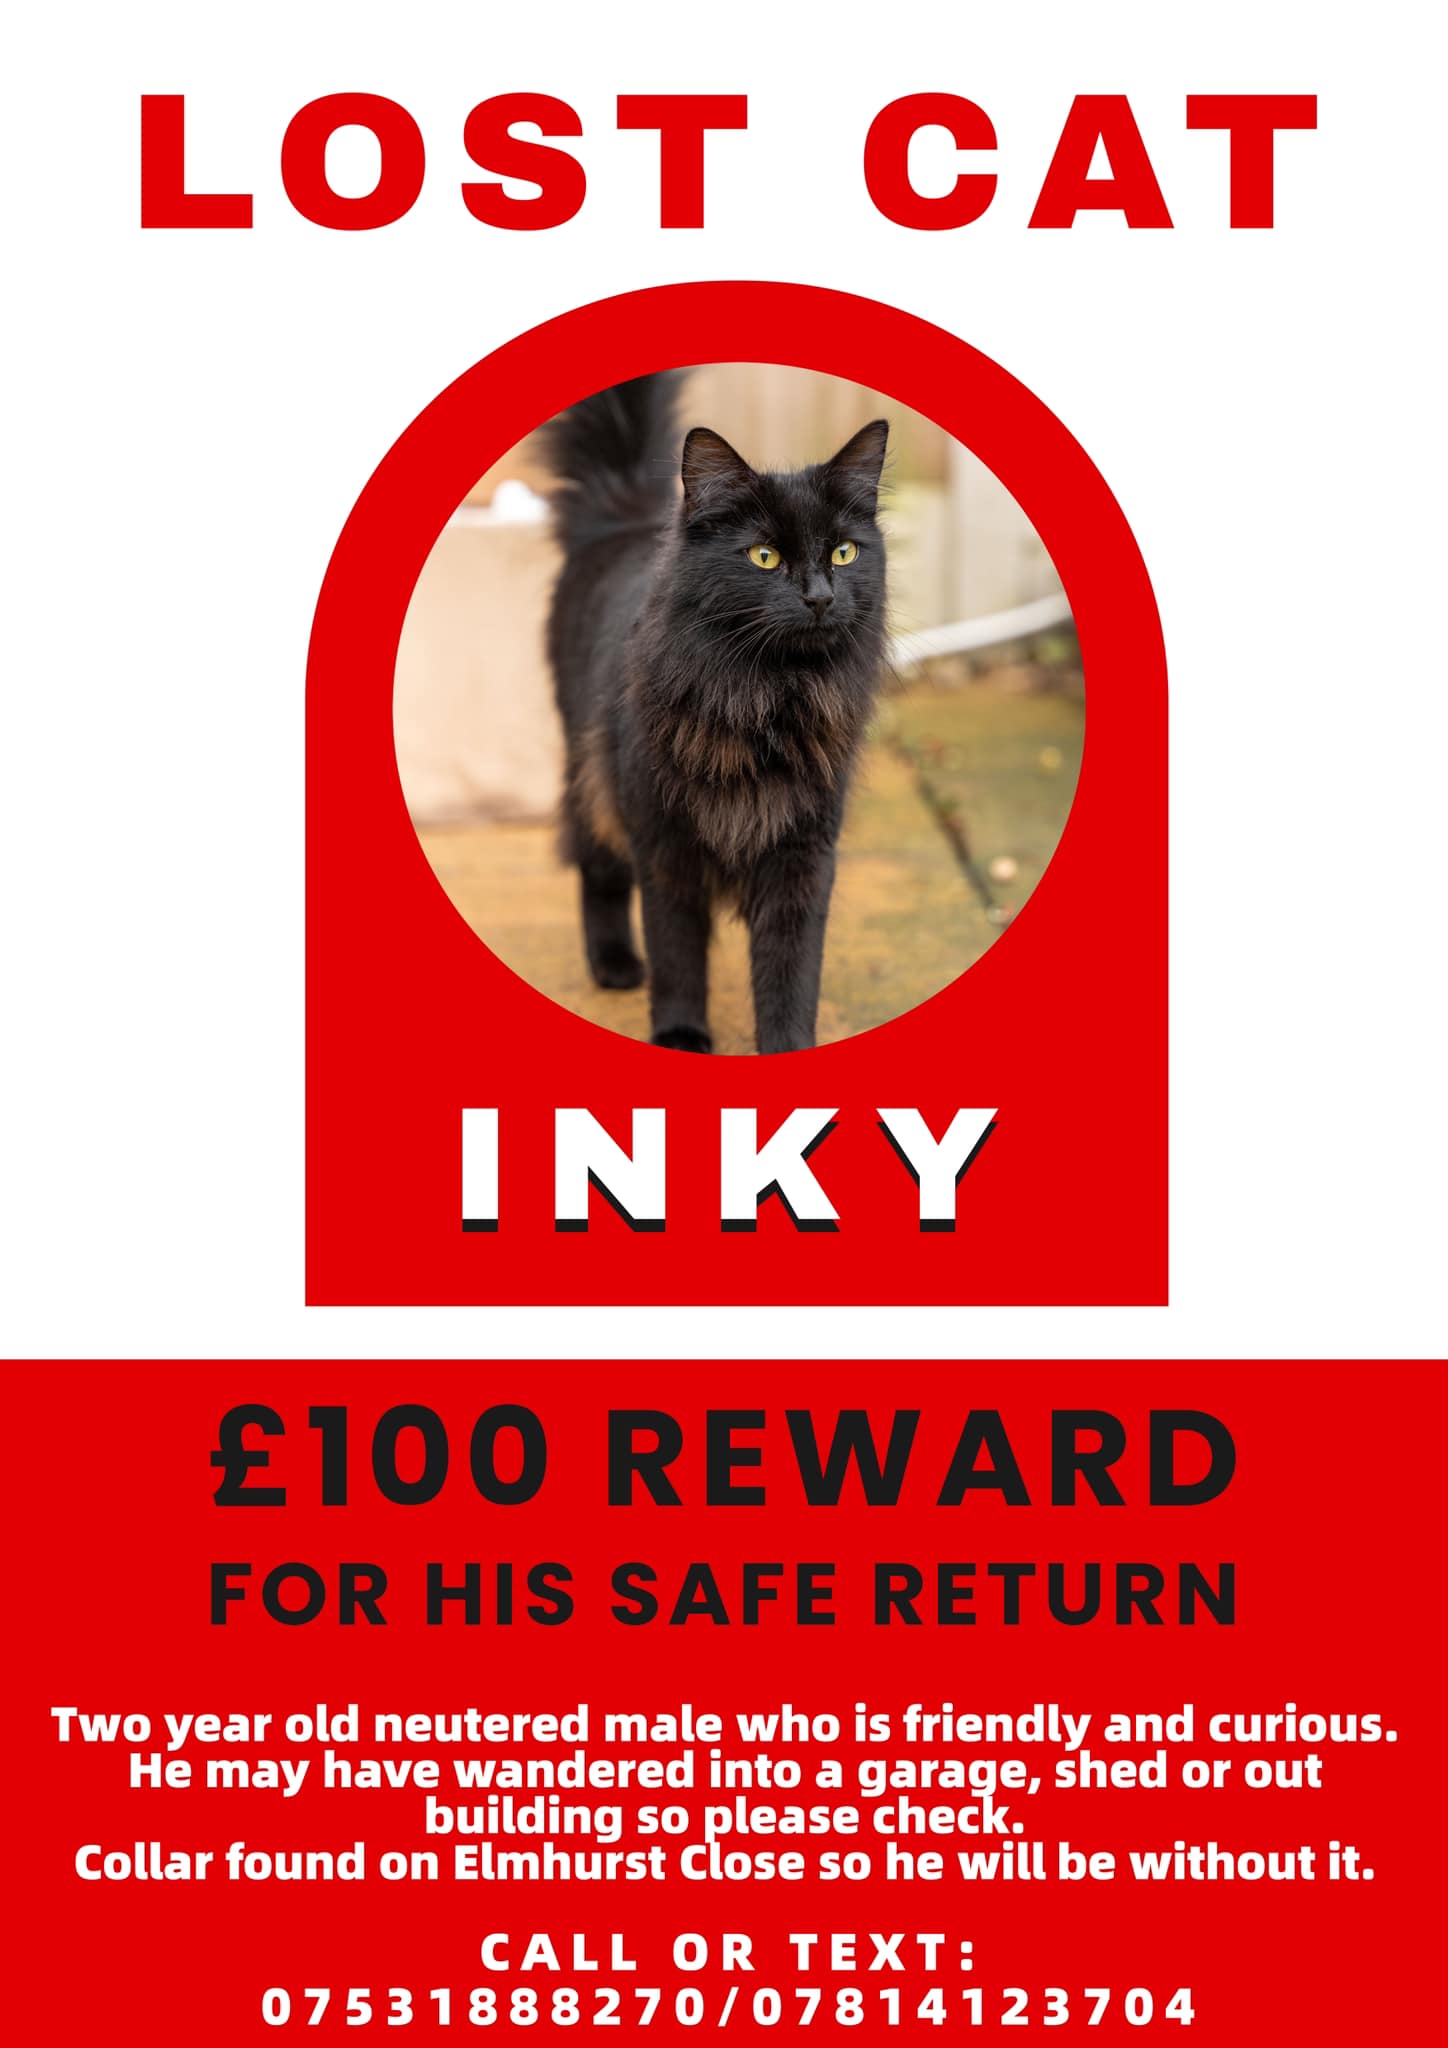 Have you seen Inky? He's been missing since November